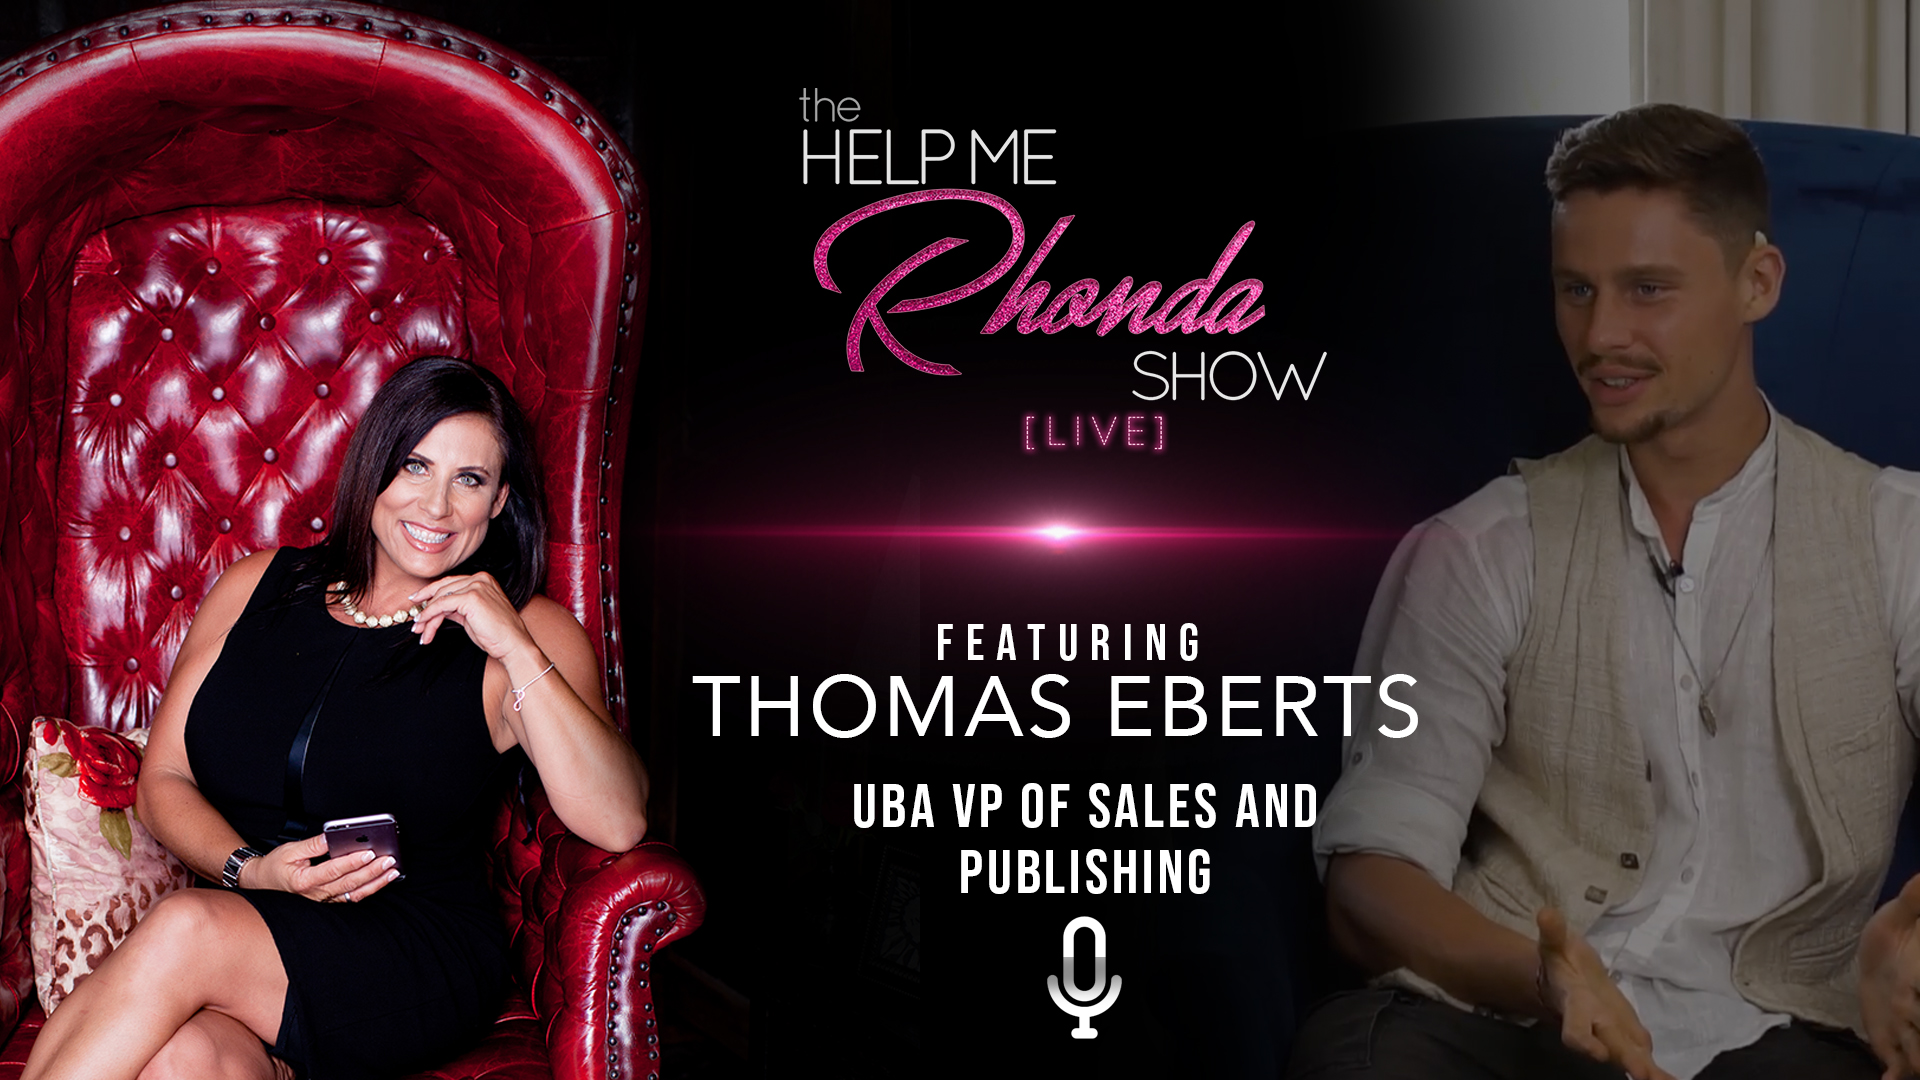 Thomas Eberts - How To Step Out Of Your Comfort Zone & Make A Change In The World!